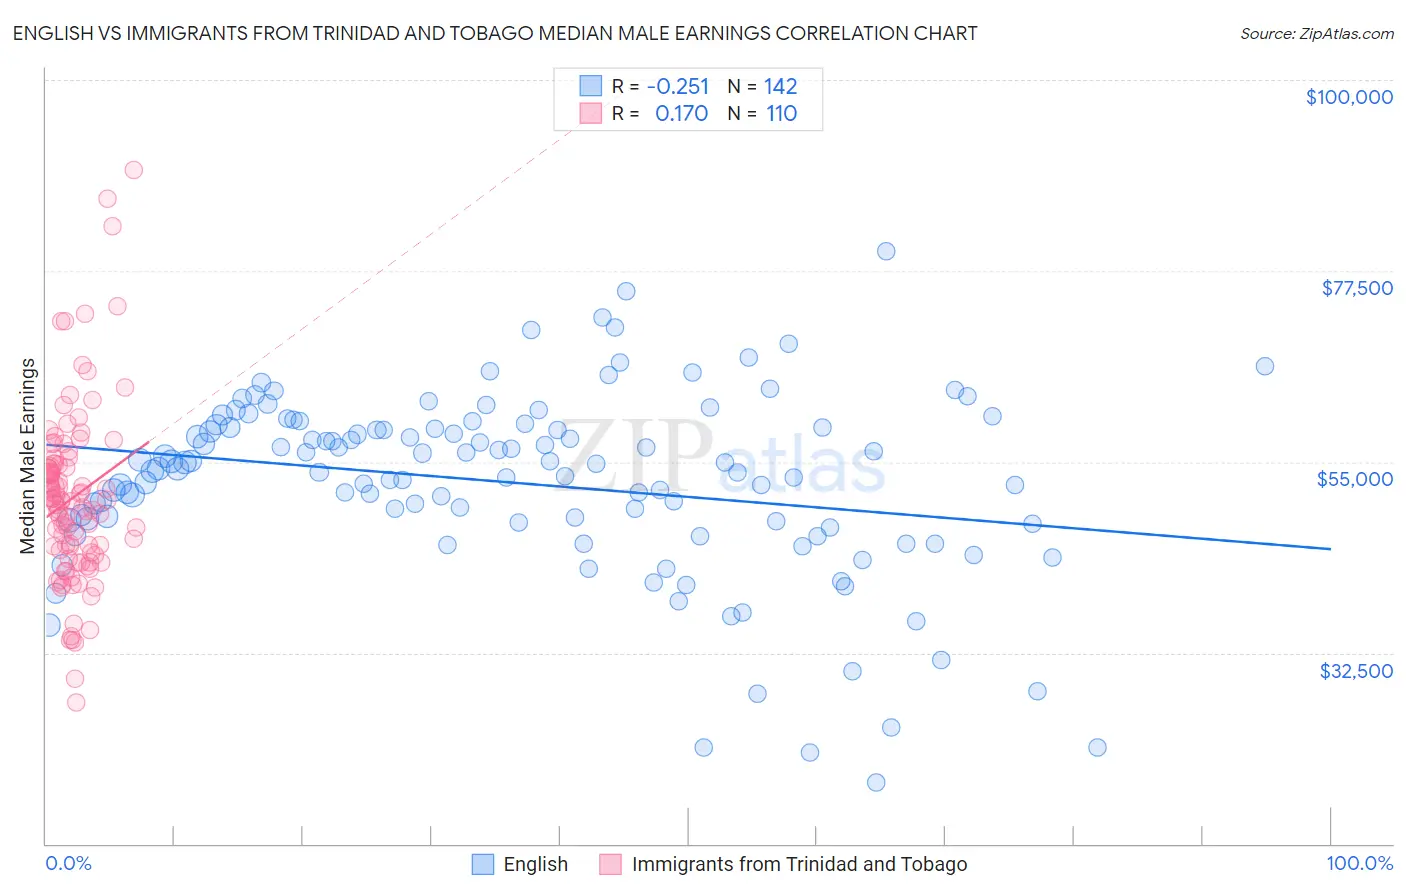 English vs Immigrants from Trinidad and Tobago Median Male Earnings